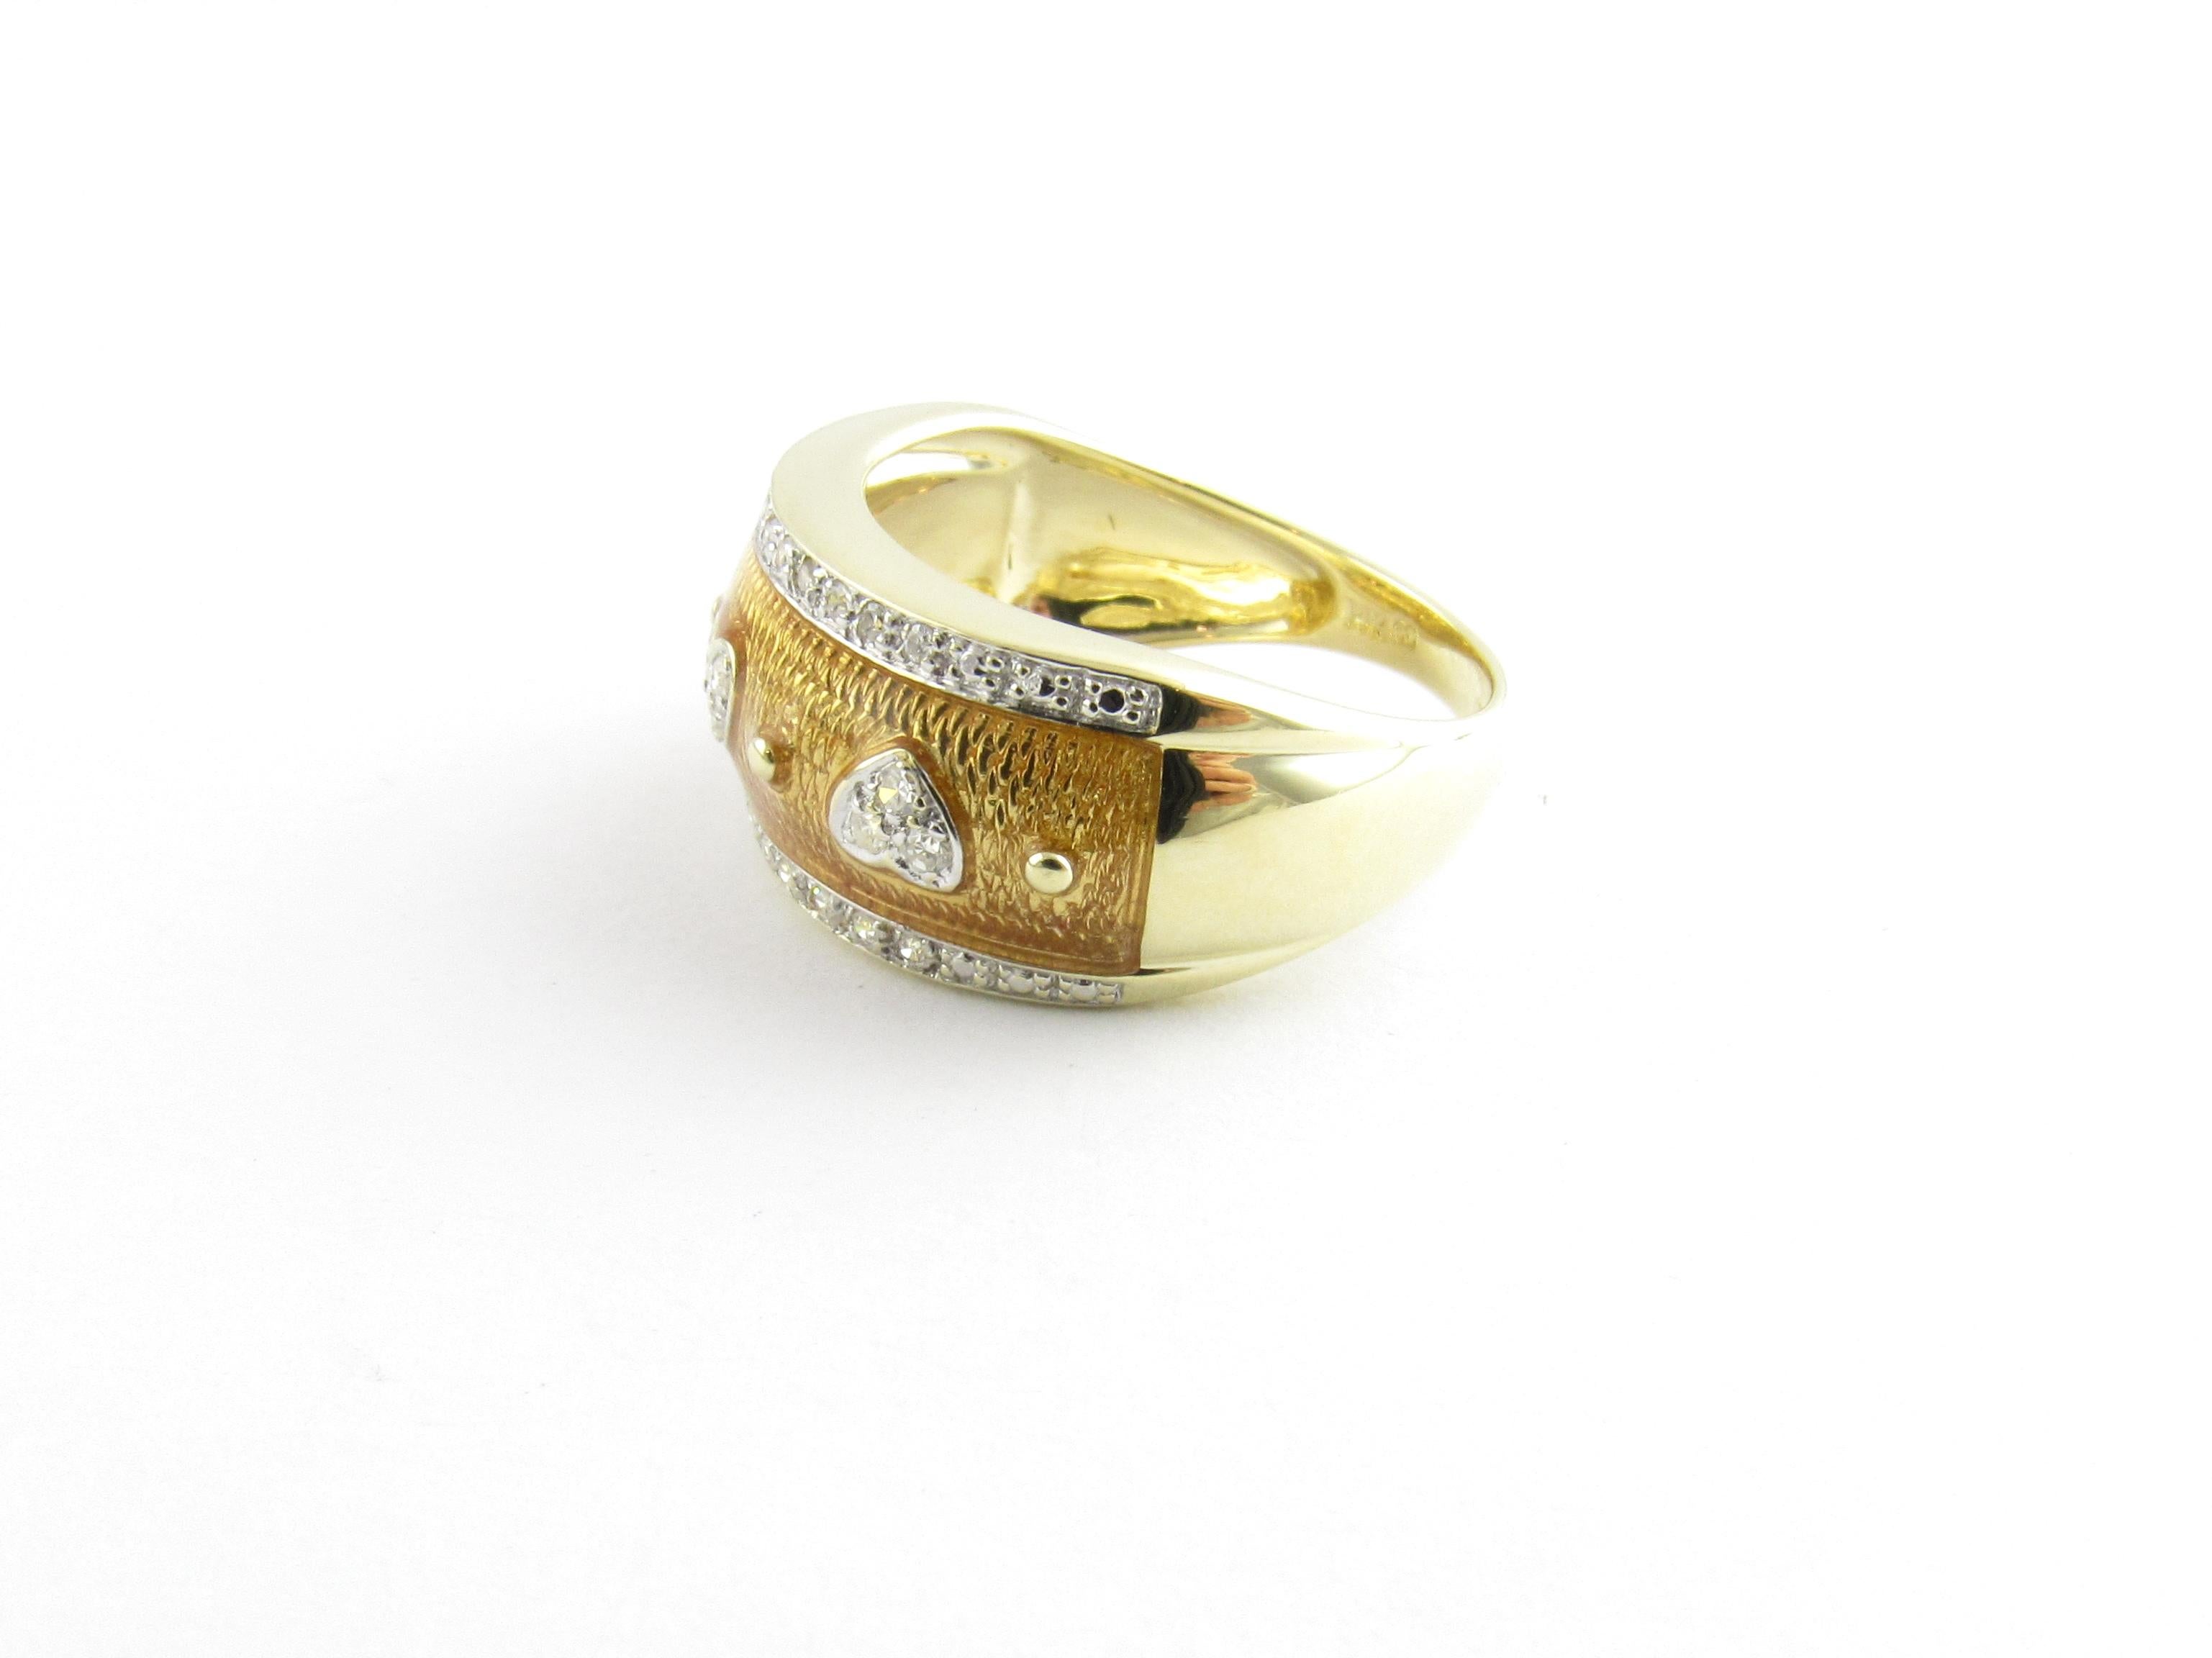 Vintage 14 Karat Yellow Gold Enamel and Diamond Ring Size 7.75

This stunning ring is beautifully detailed in yellow enamel and 31 round single cut diamonds set in classic 14K yellow gold. Width: 10 mm. Shank: 3 mm.

Approximate total diamond